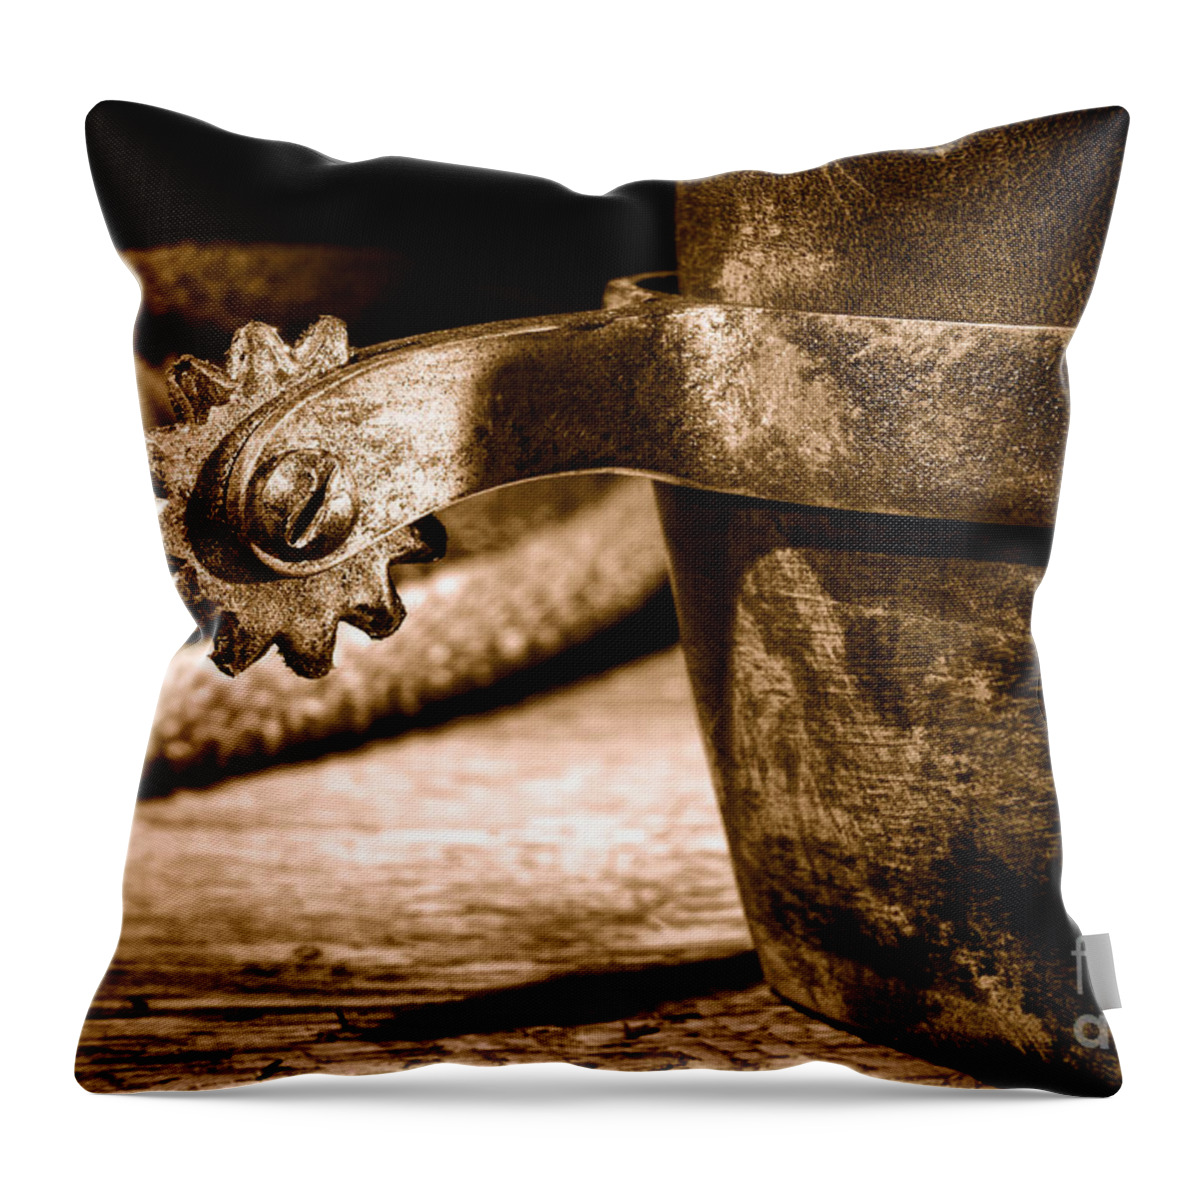 Rodeo Throw Pillow featuring the photograph Spur - Sepia by Olivier Le Queinec